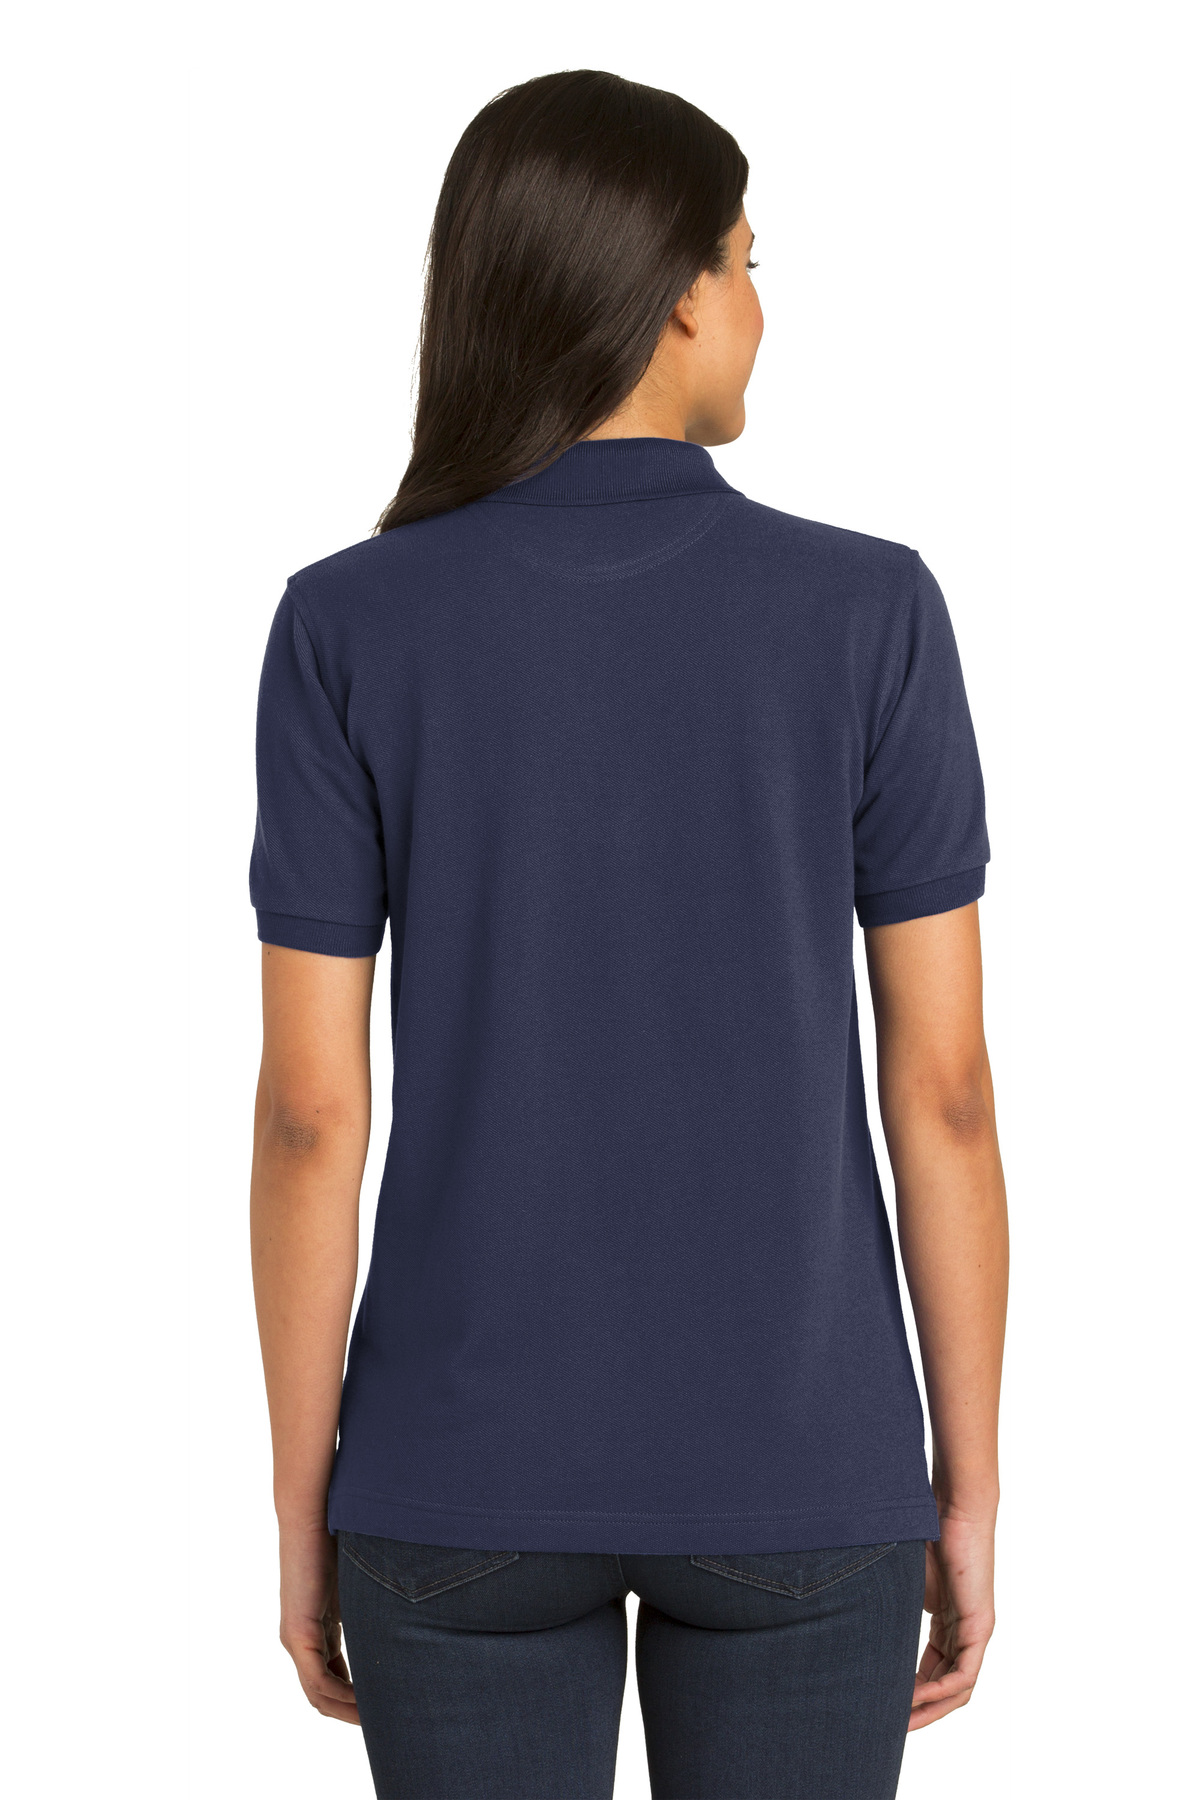 Port Authority Ladies Heavyweight Cotton Pique Polo | Product | Company ...